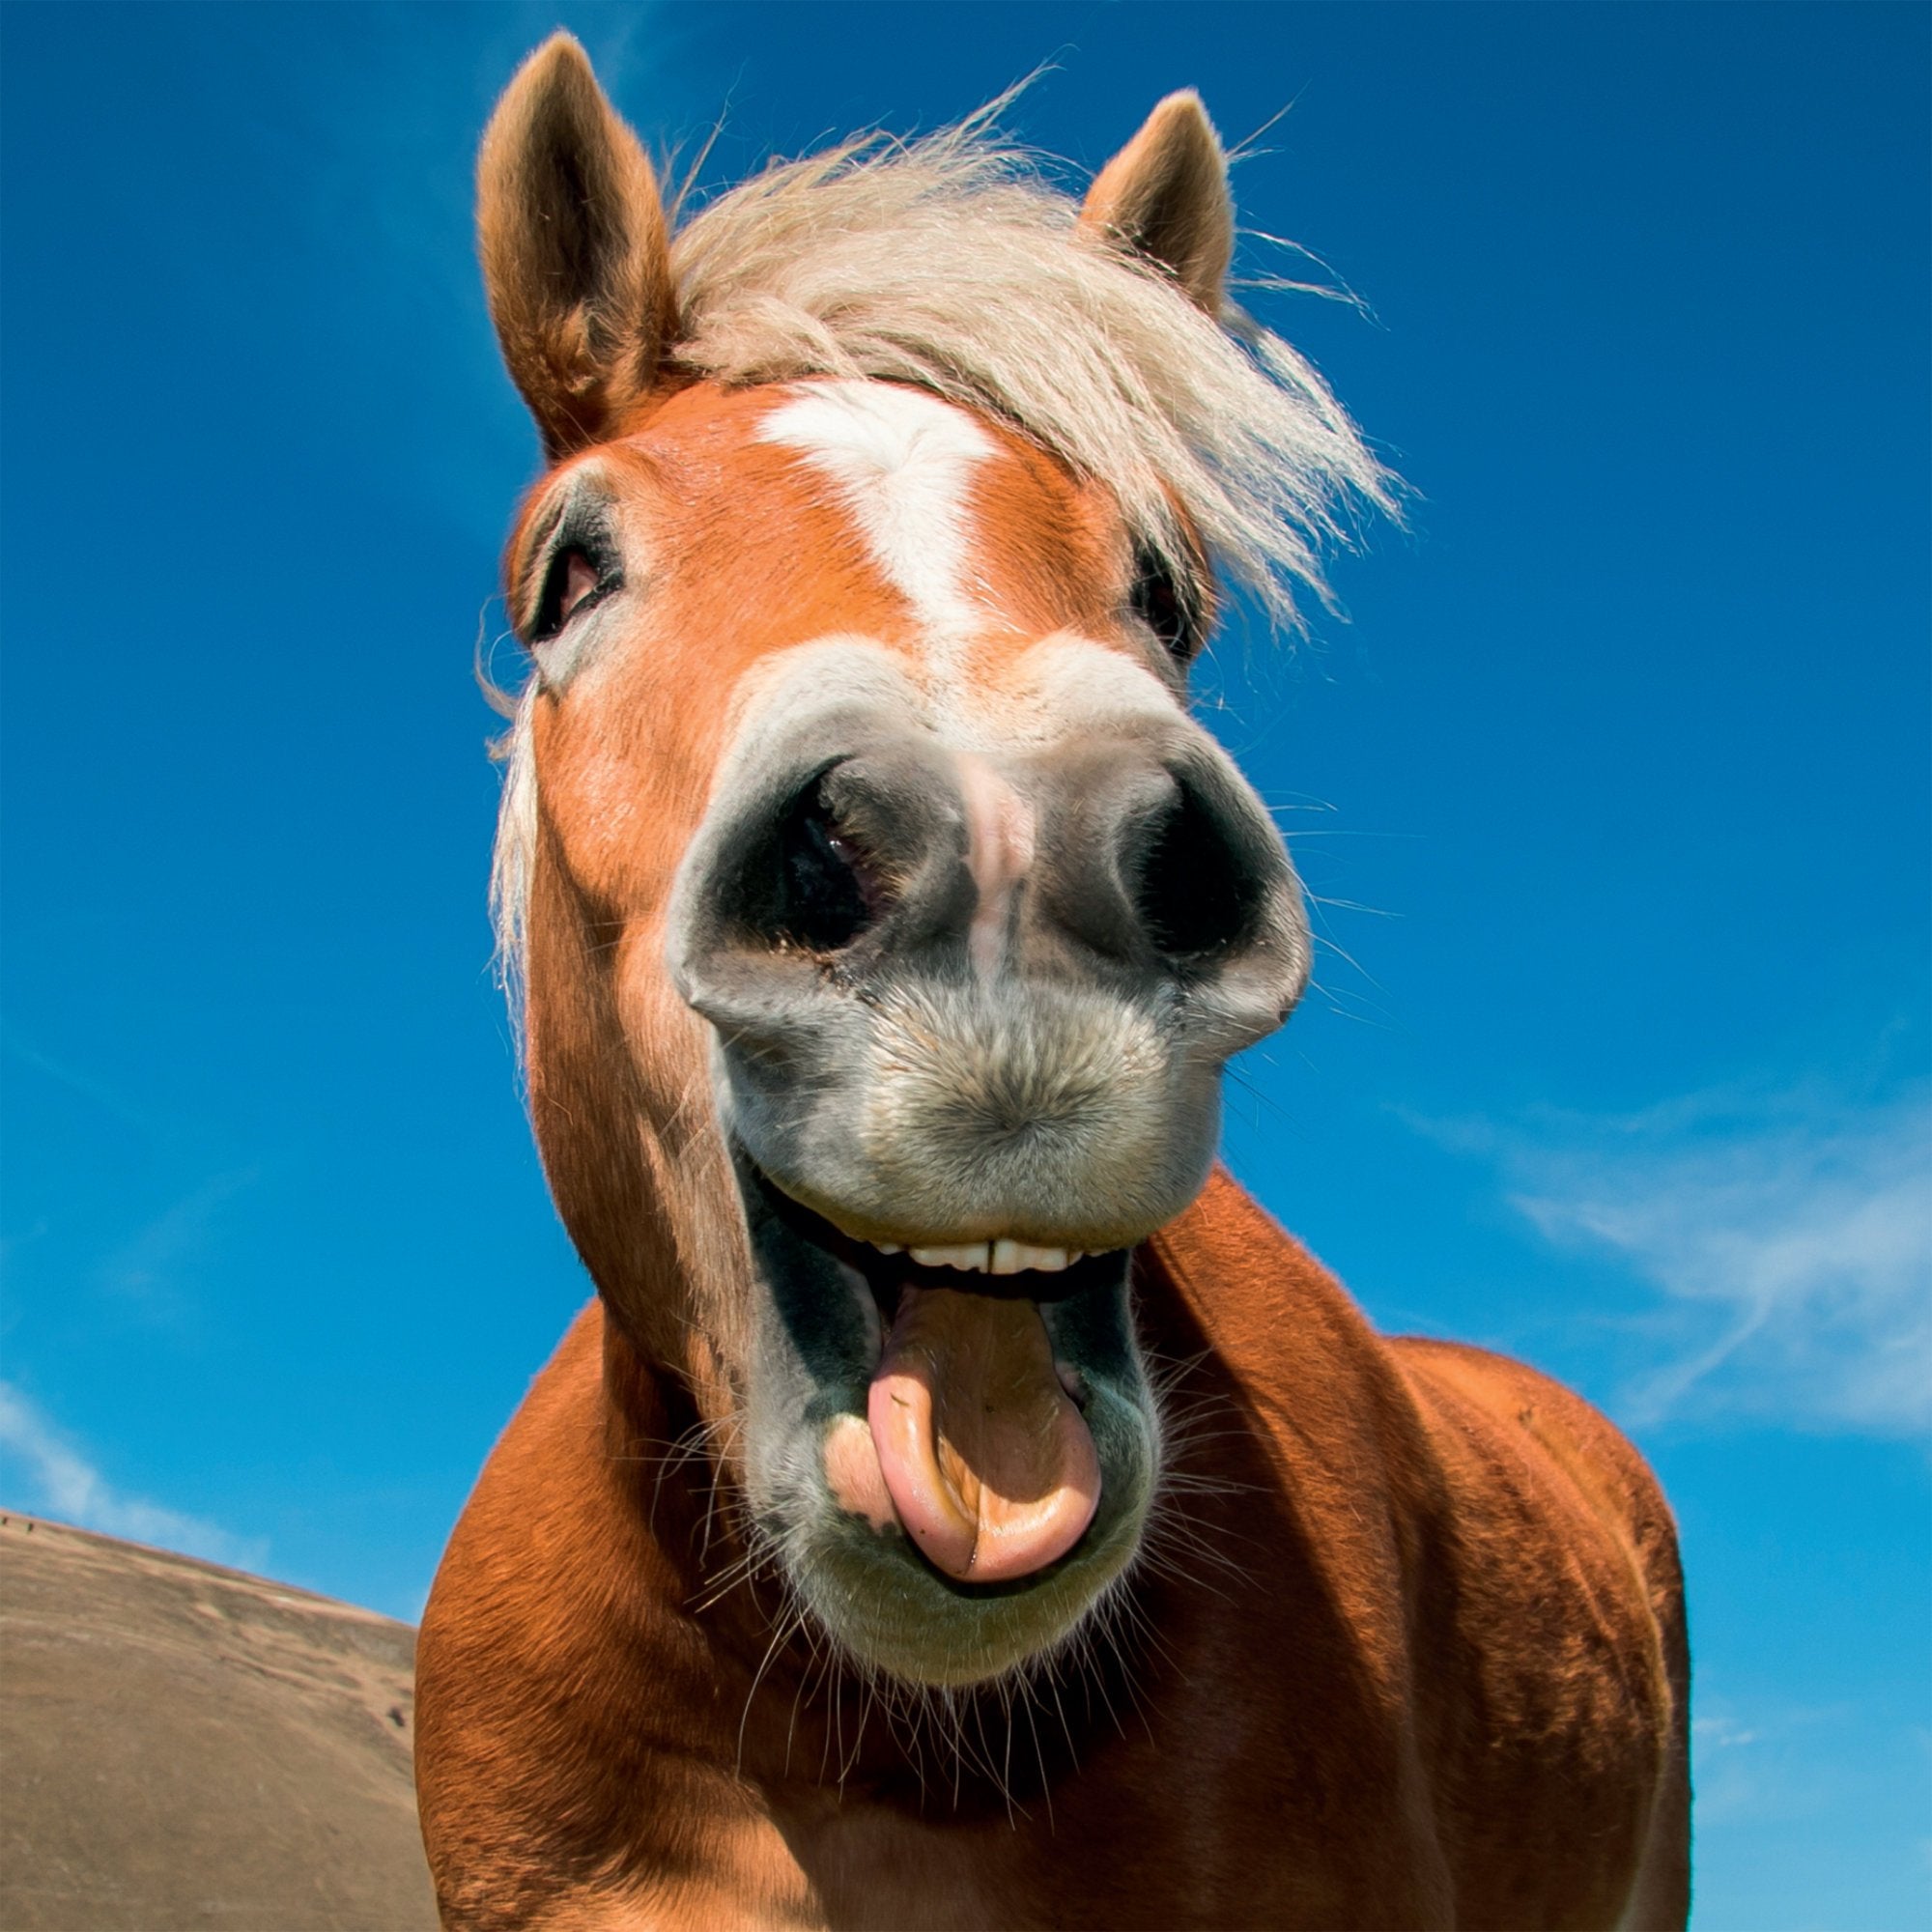 Photograph of Open Horse Laughing Greetings Card at Nicole's Shop